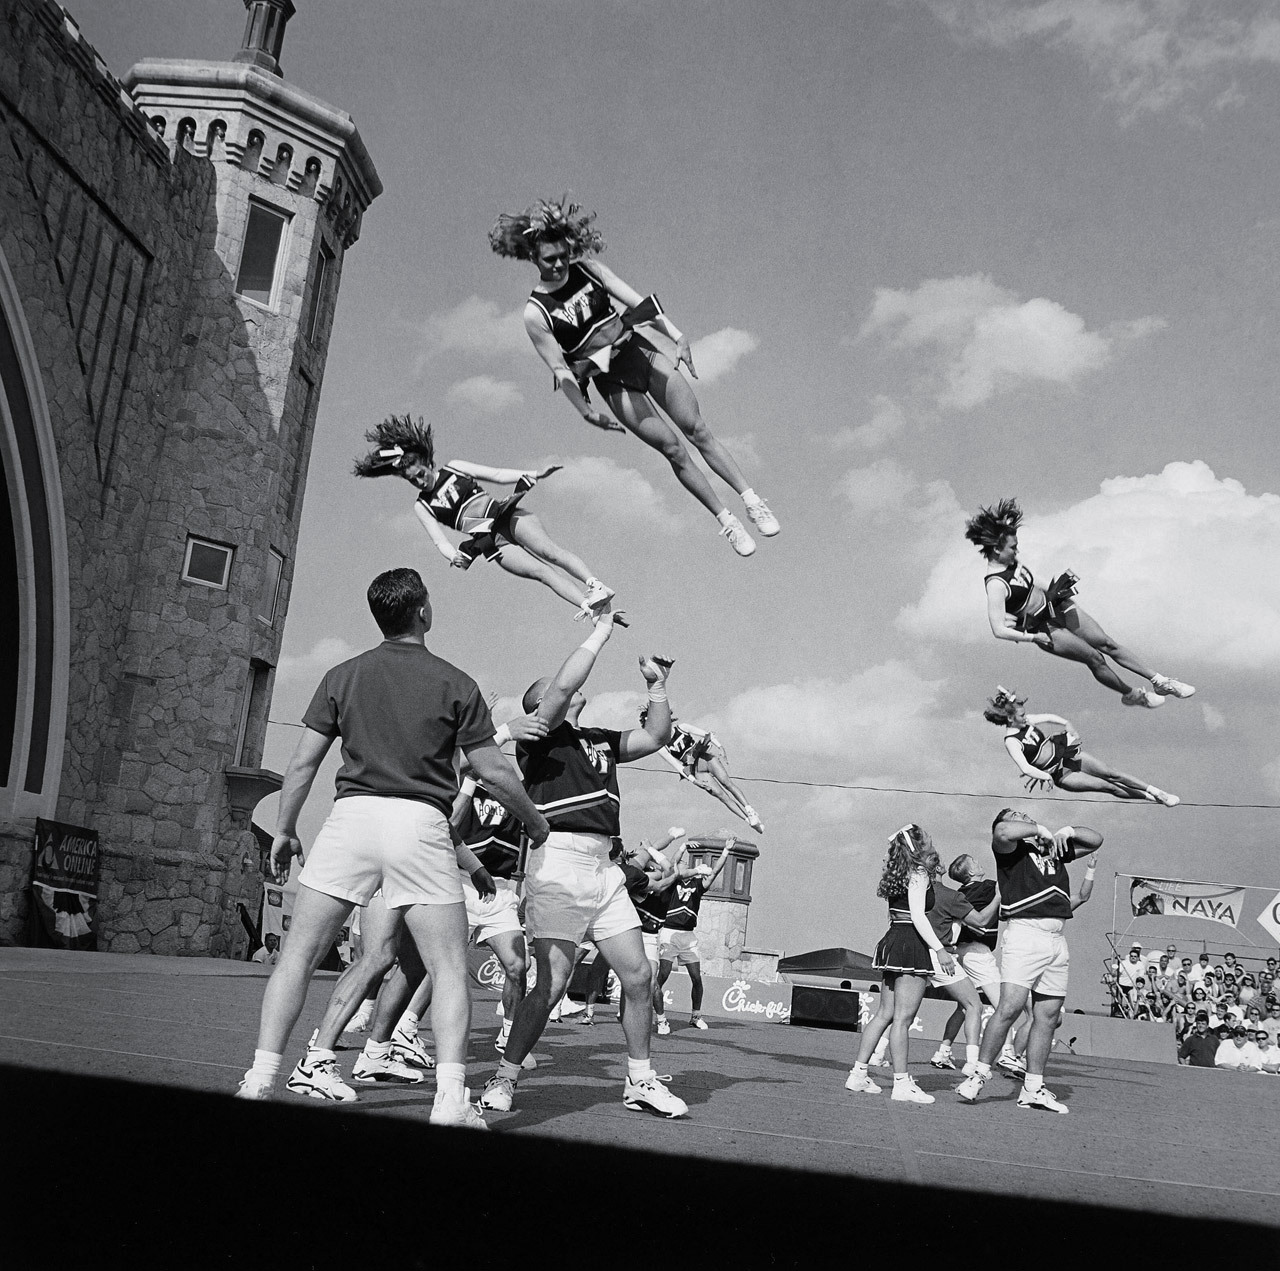 National Cheerleaders Convention, Daytona Beach, Florida photo by Toby Old, 1998